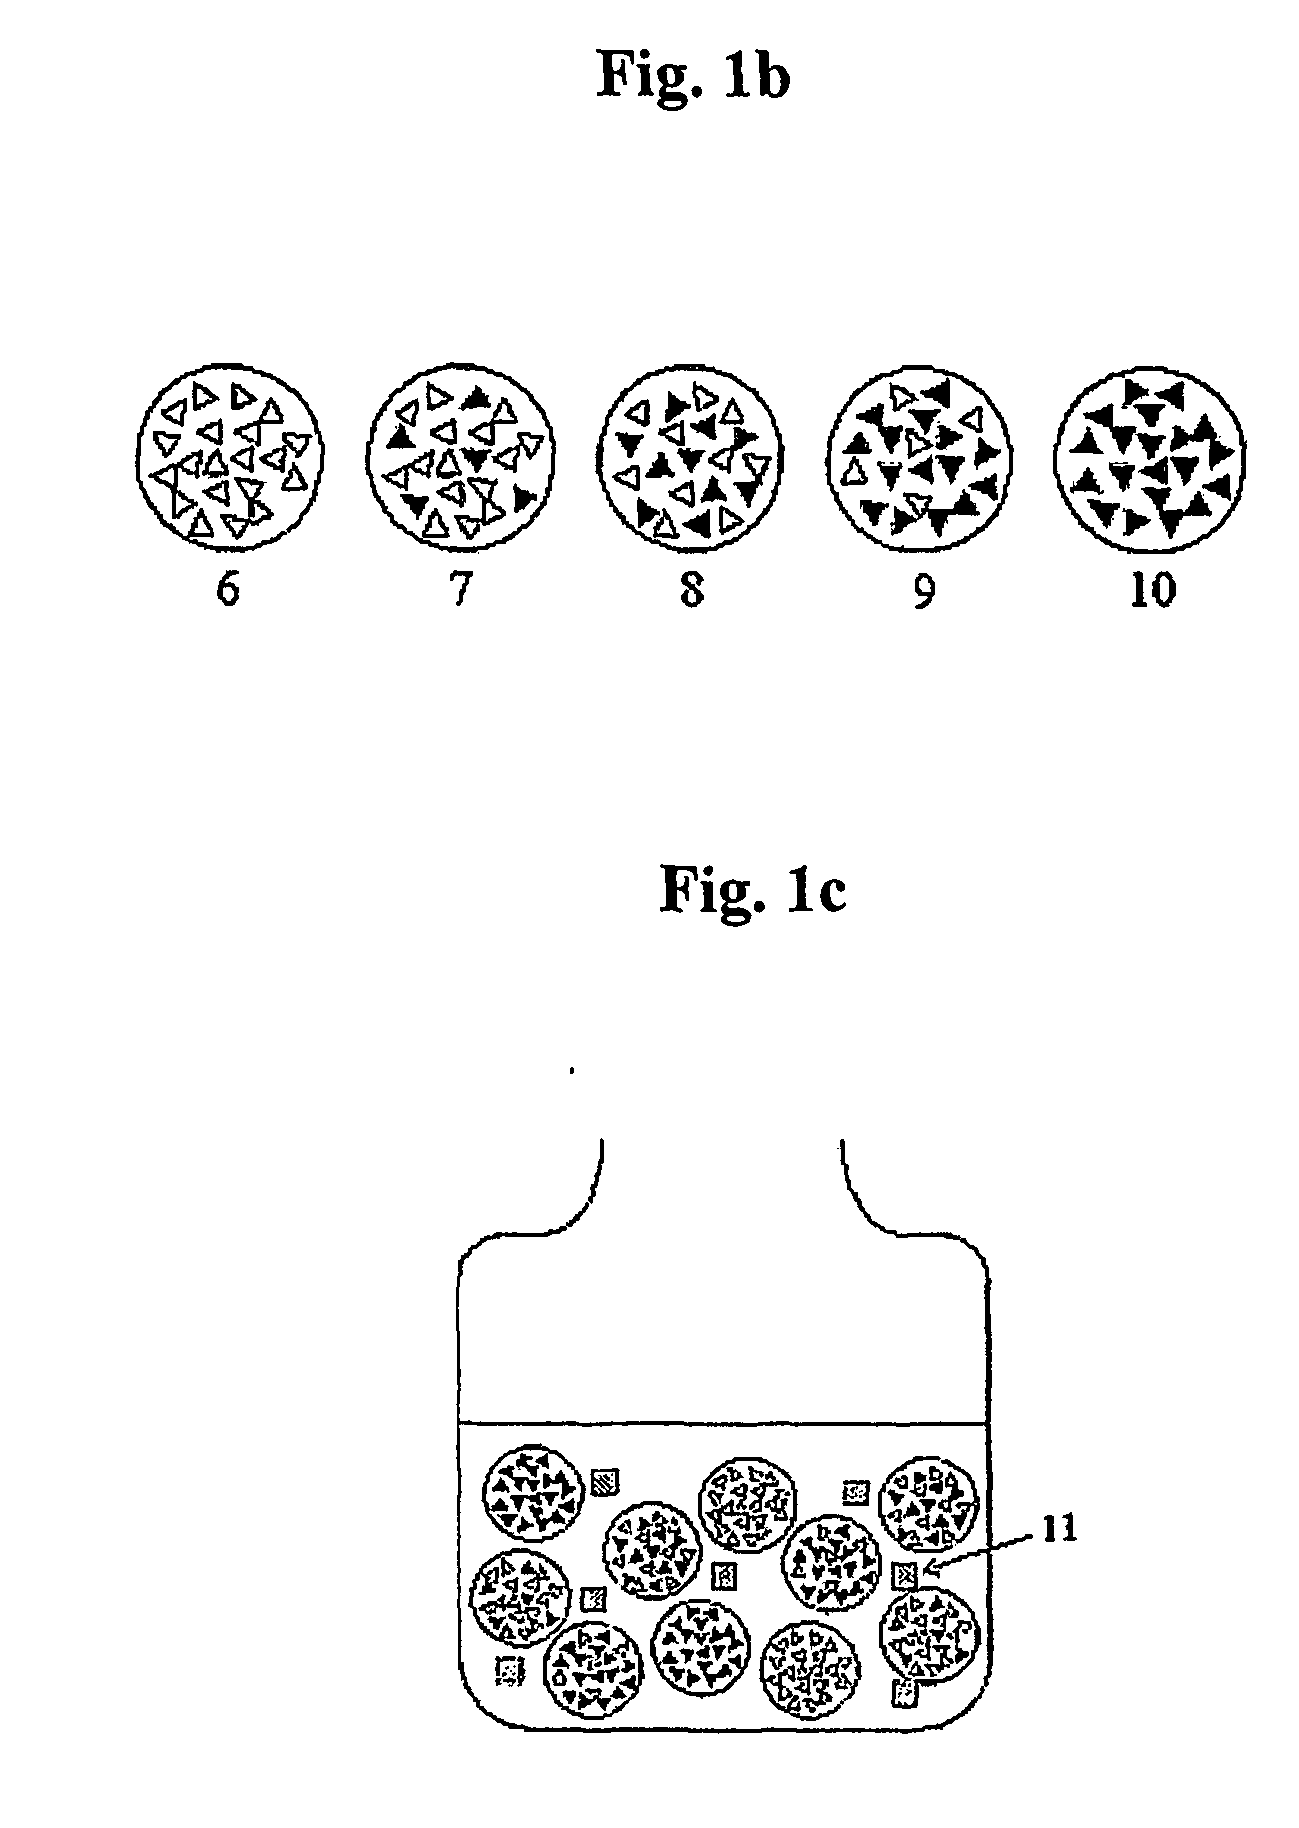 Method of preparing mixed formulation of sustained release microspheres by continuous one-step process